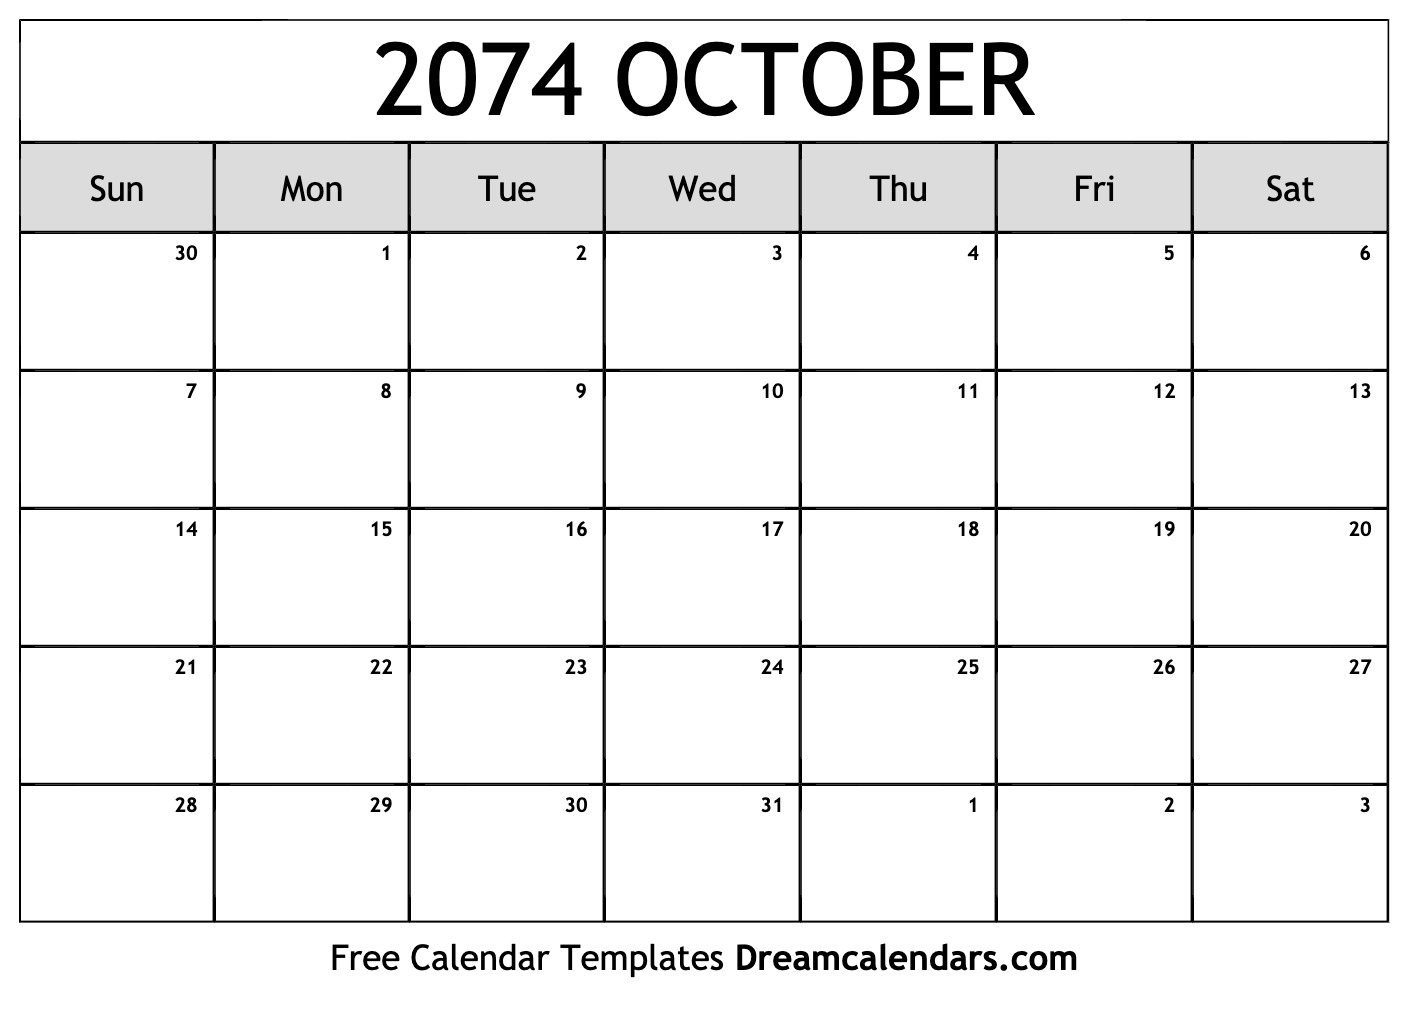 october-2074-calendar-free-blank-printable-with-holidays